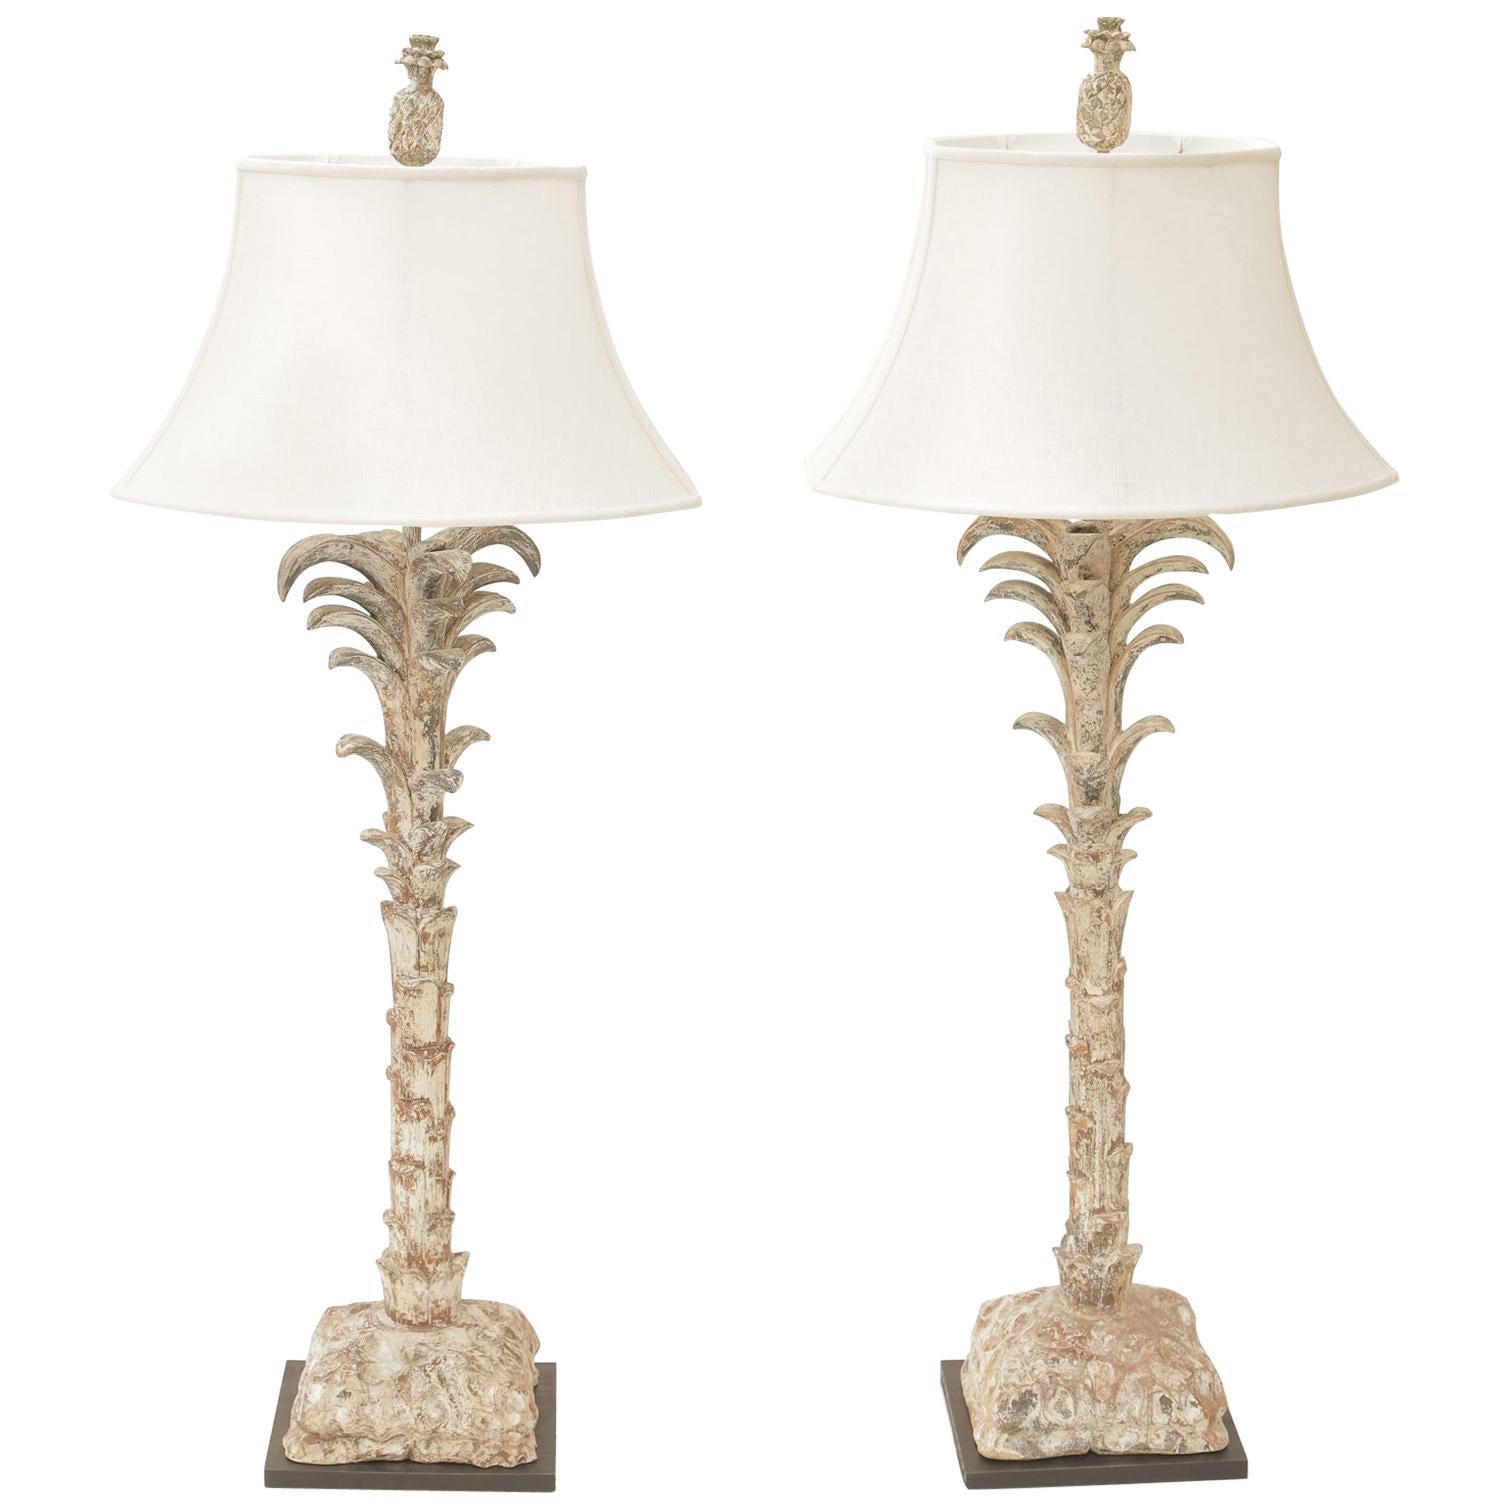 Pair of Carved Wood Palm Tree Form Table Lamps